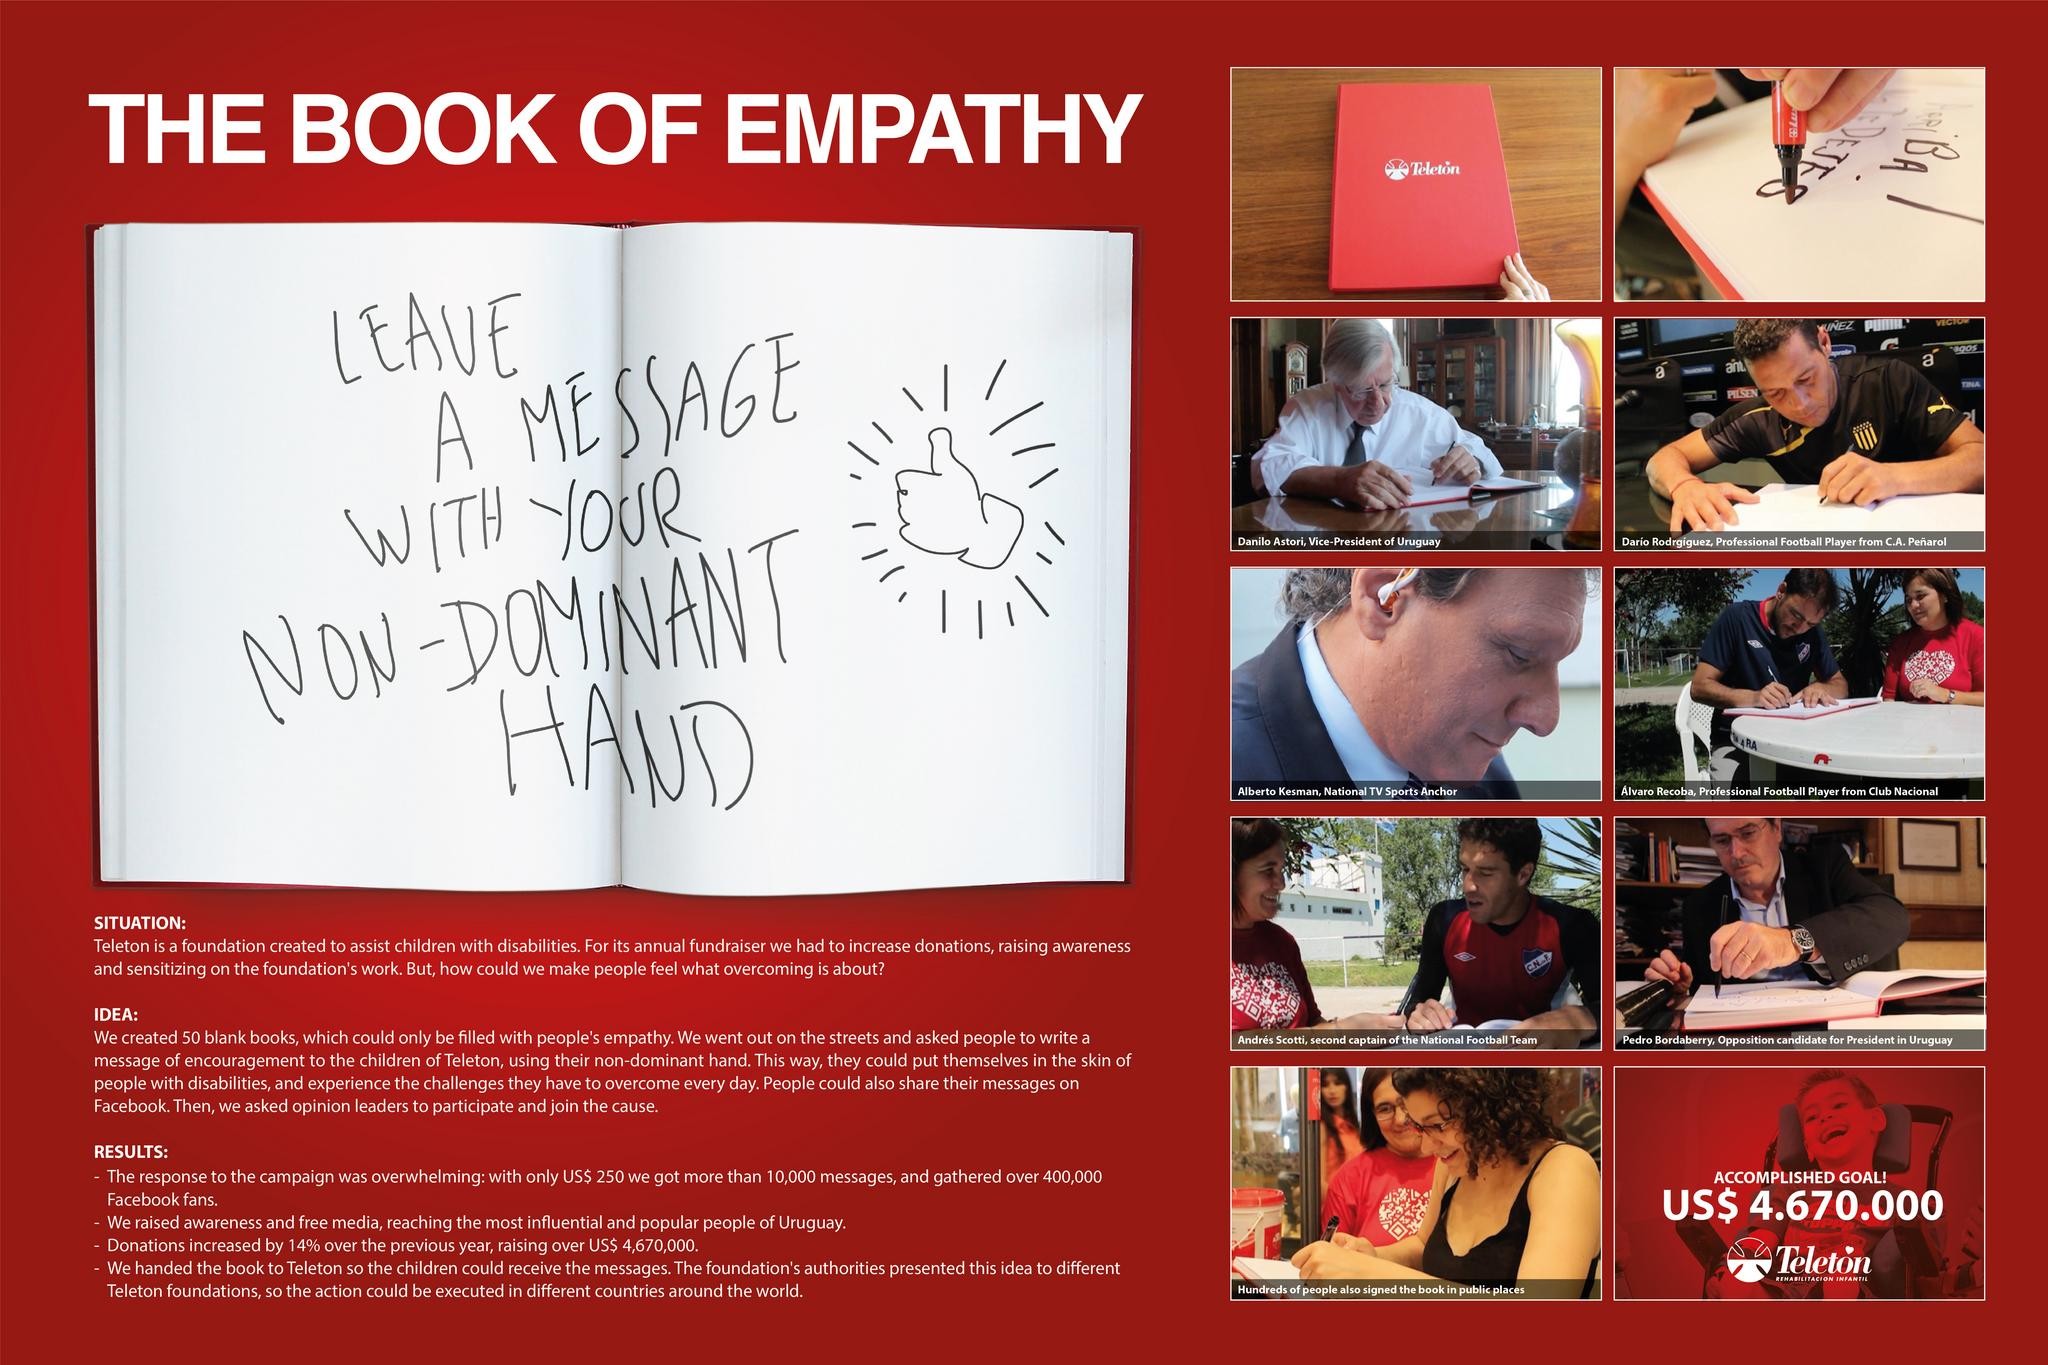 THE BOOK OF EMPATHY